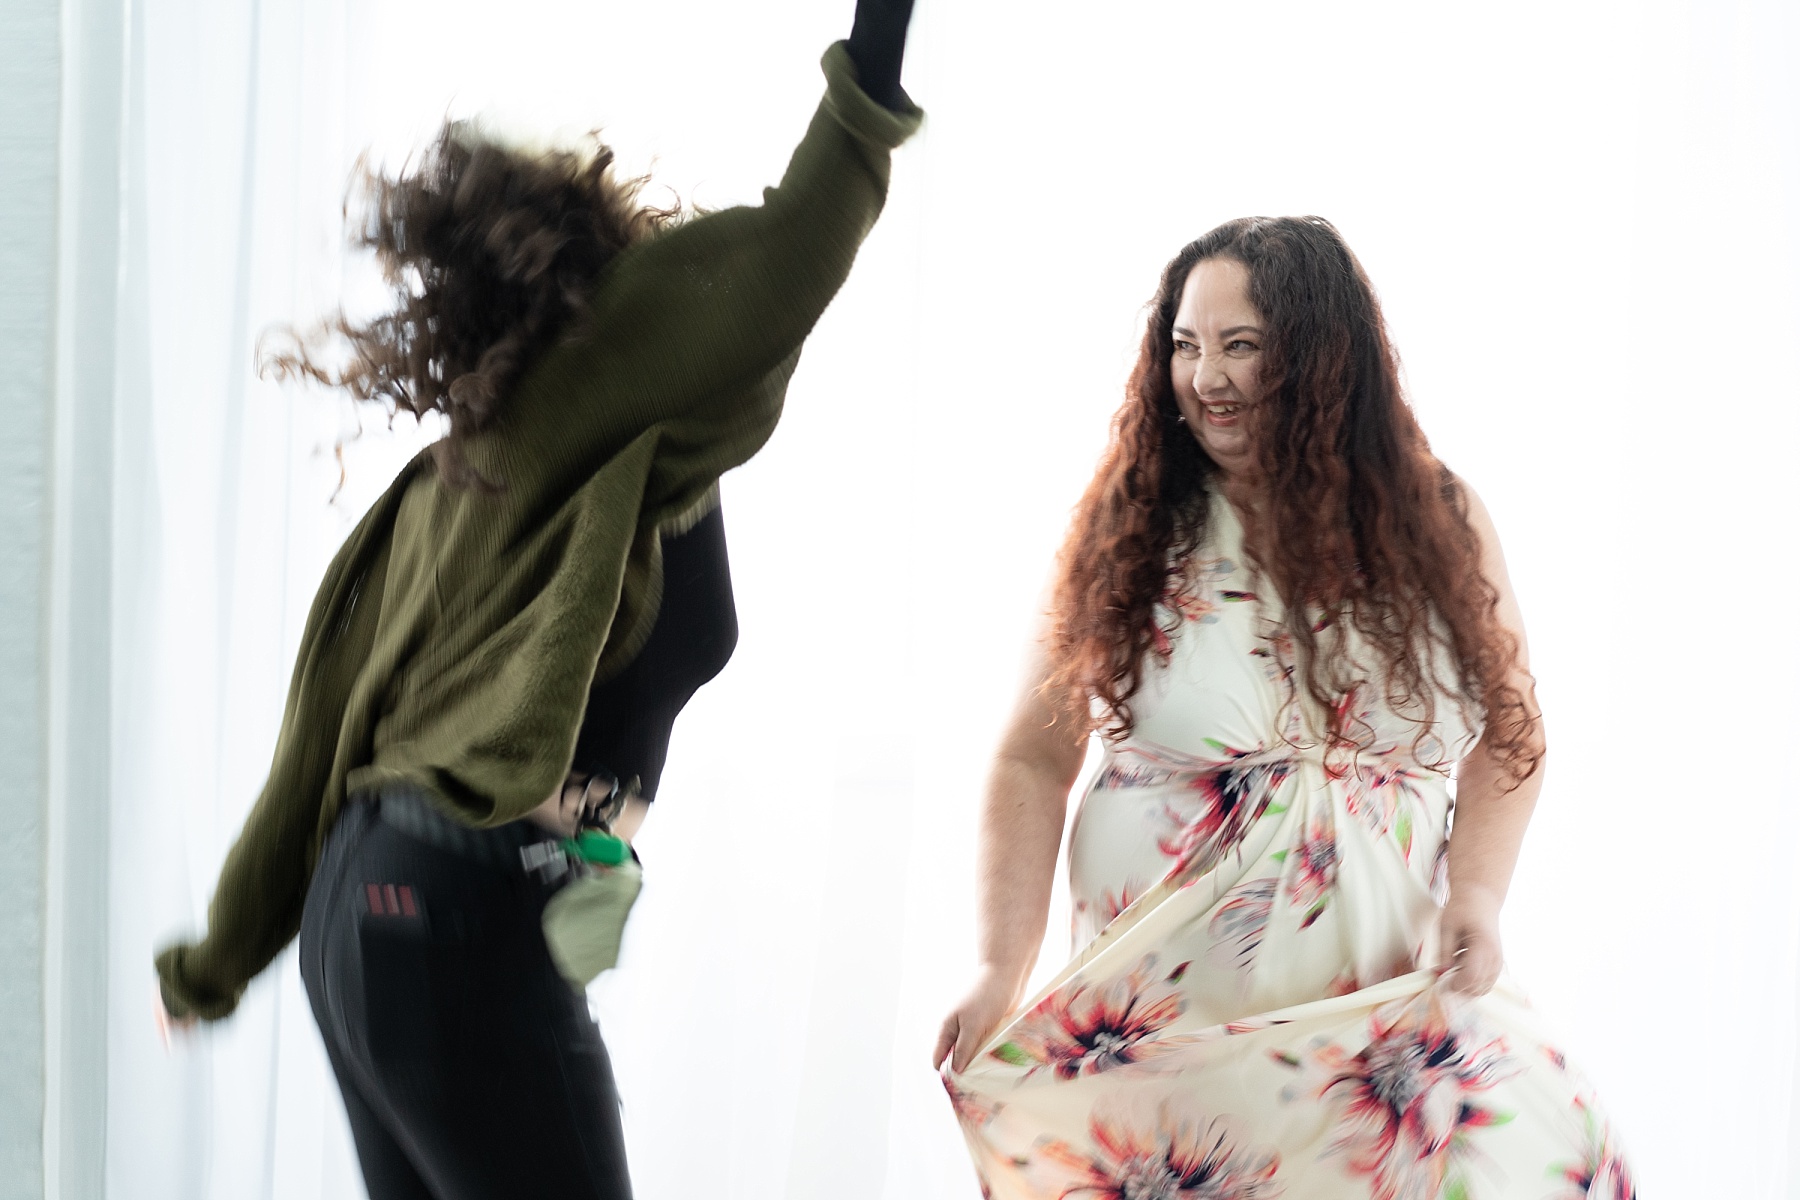 photo of women dancing during a photoshoot to celebrate women over the age of 50